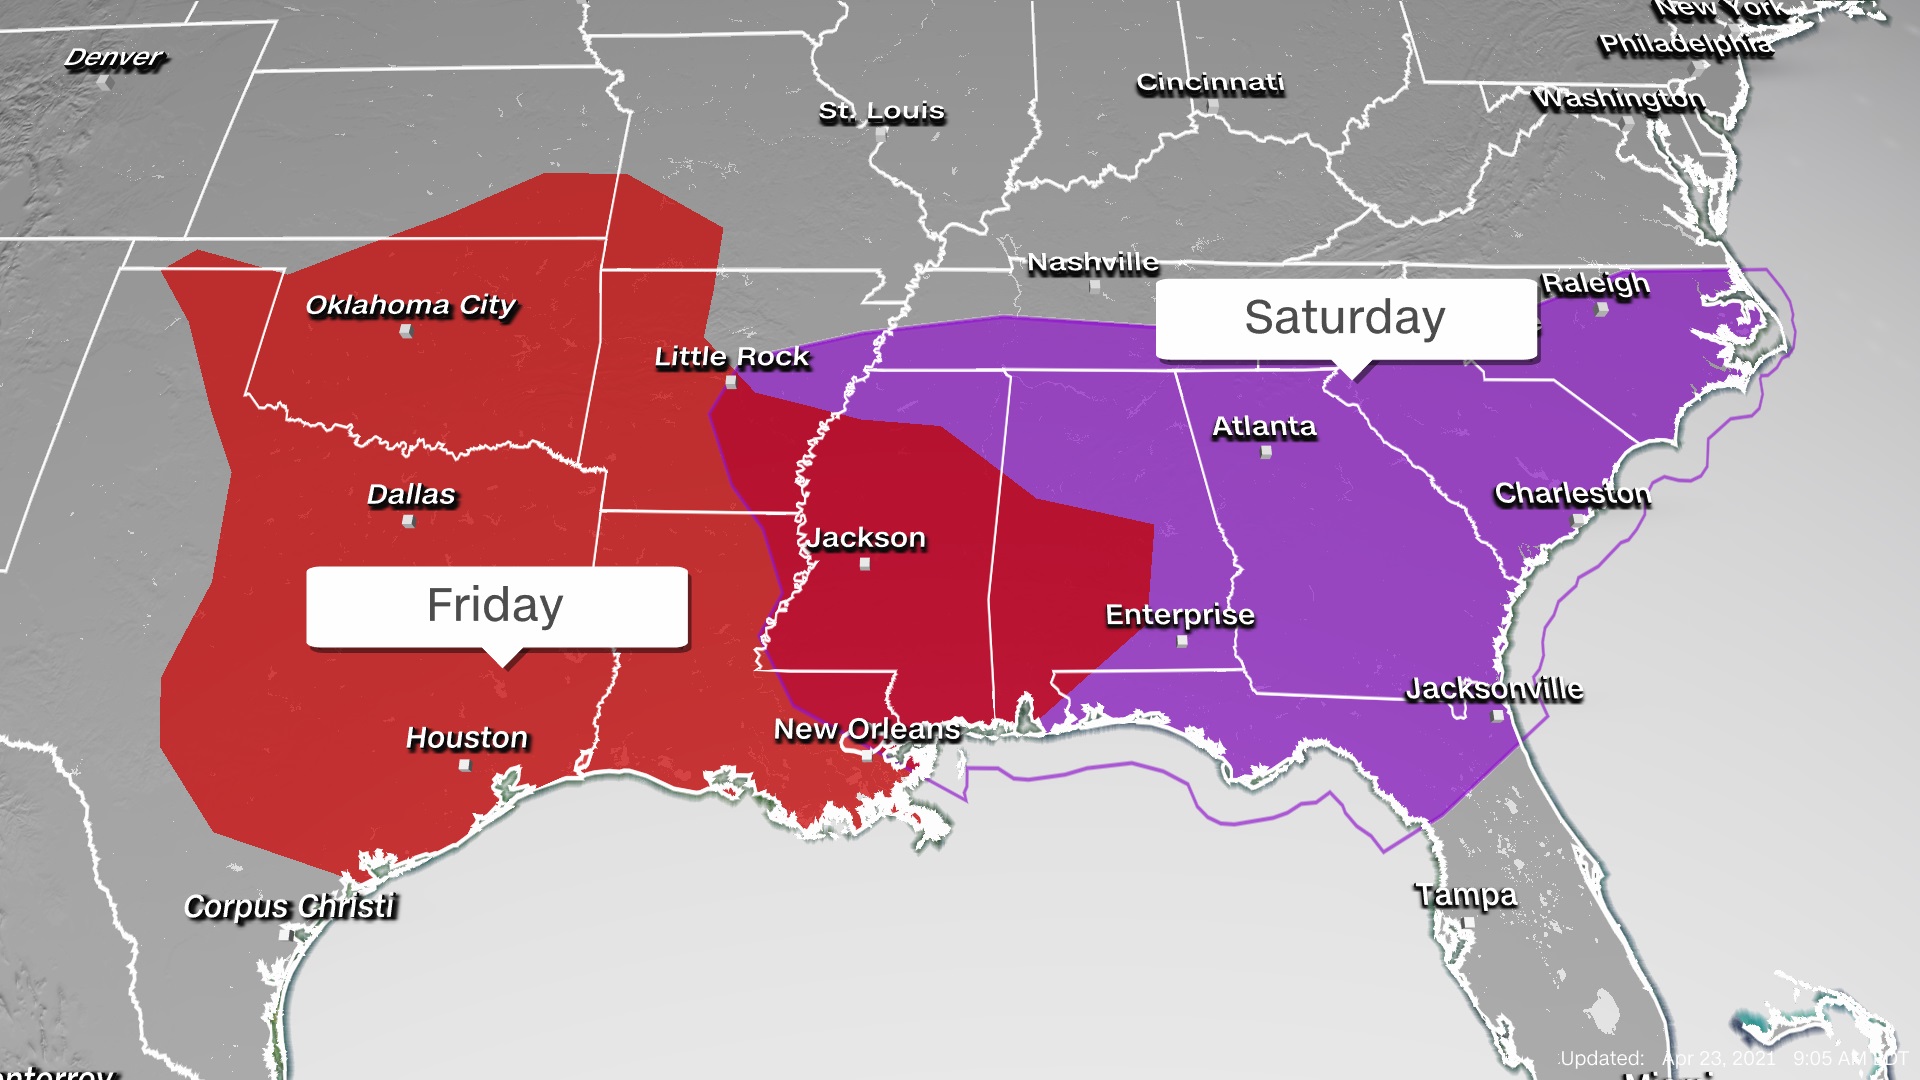 Severe Storms Return to the Southeast on Saturday